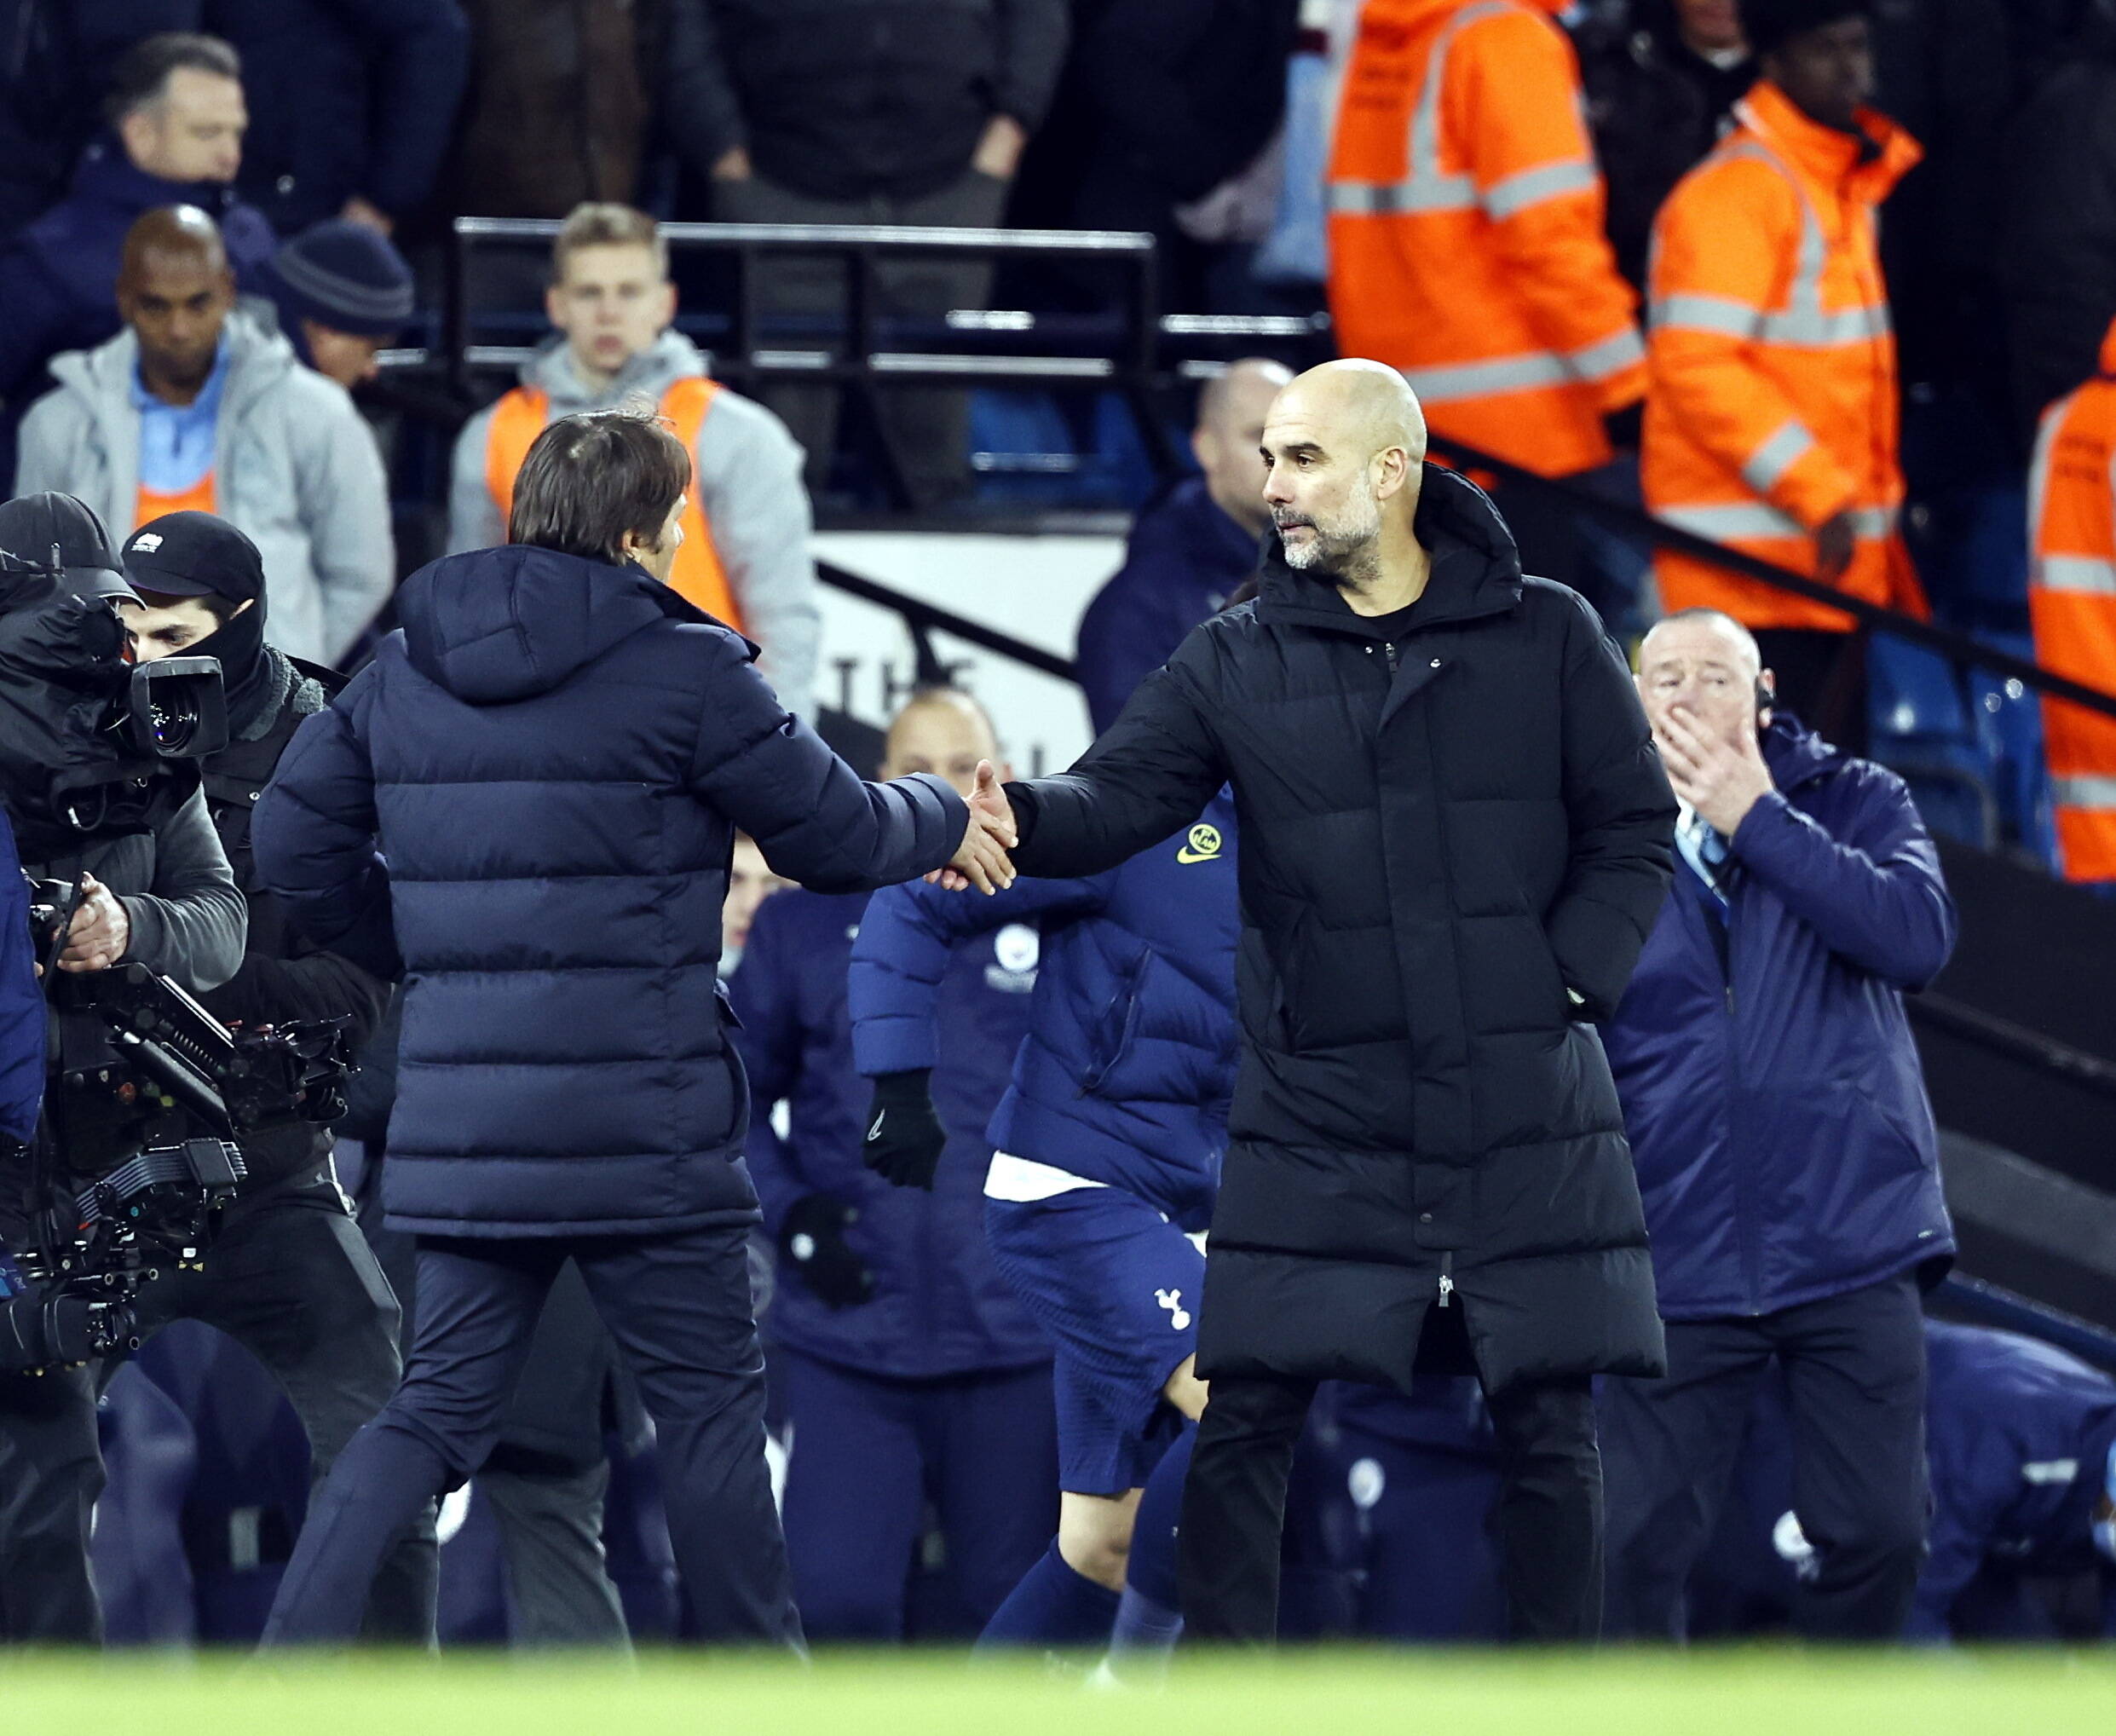 Antonio Conte and Pep Guardiola shake hands after Tottenham's 3-2 win at Man City in February 2022